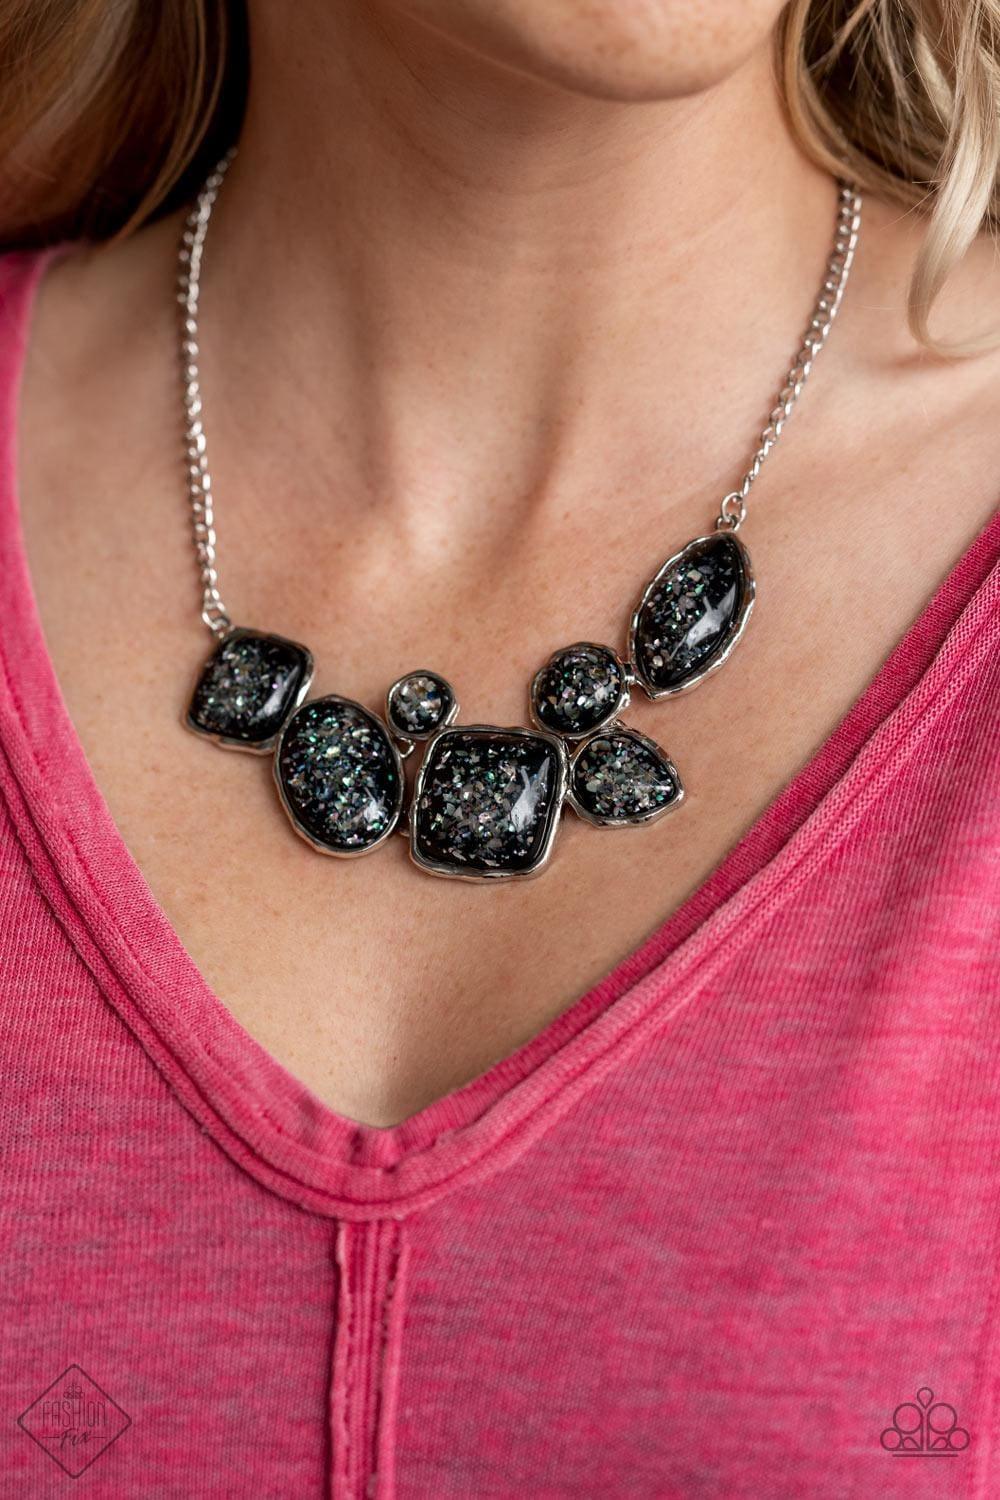 Paparazzi Accessories - So Jelly - Black Necklace - Bling by JessieK